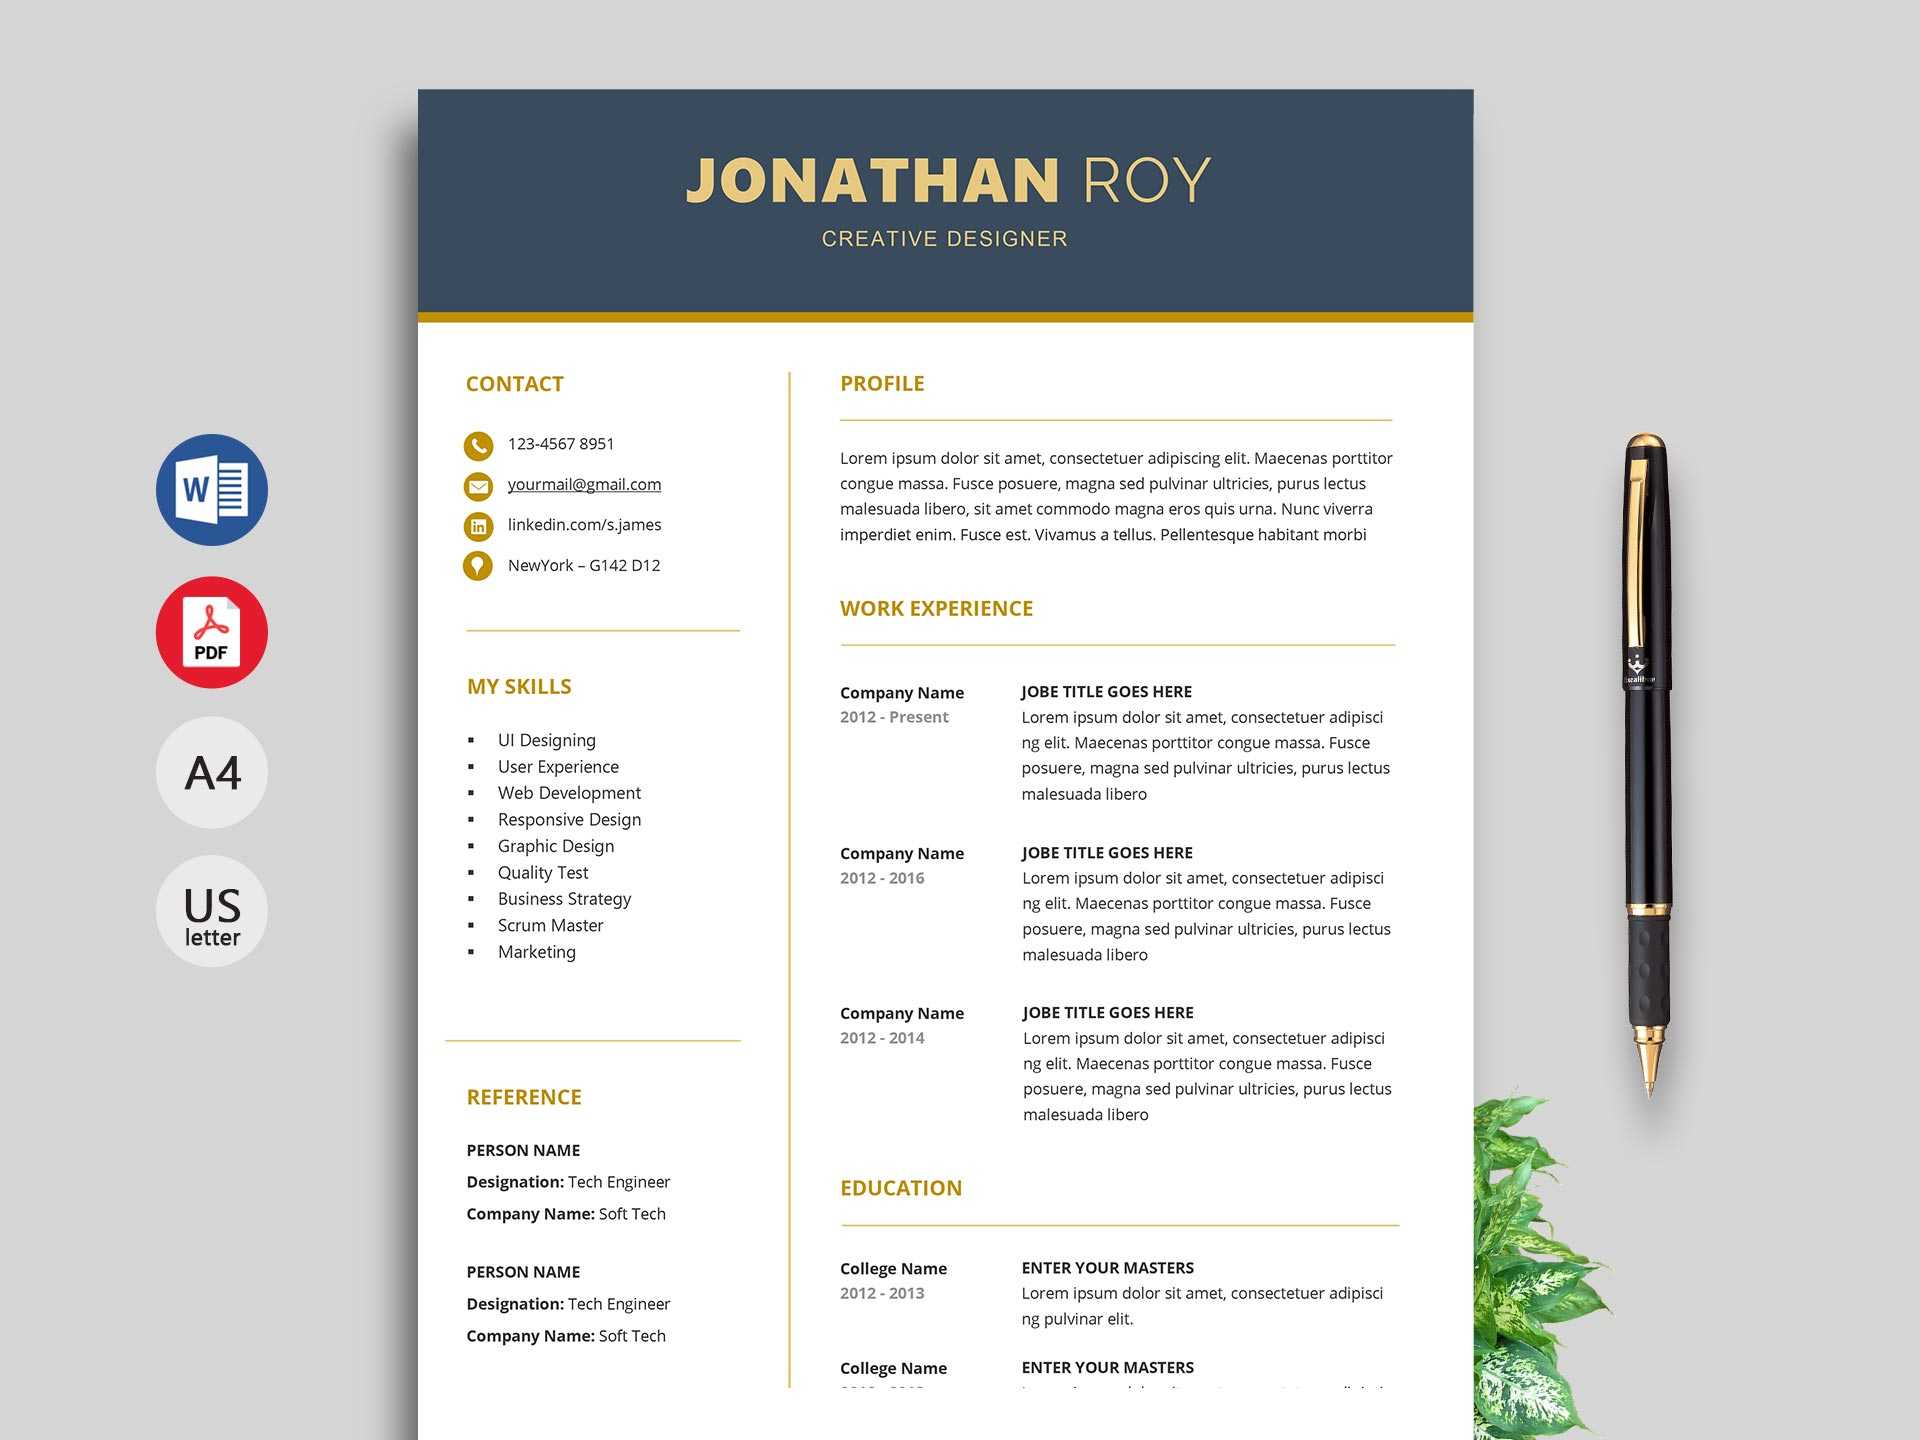 Free Resume & Cv Templates In Word Format 2020 | Resumekraft Within Free Downloadable Resume Templates For Word